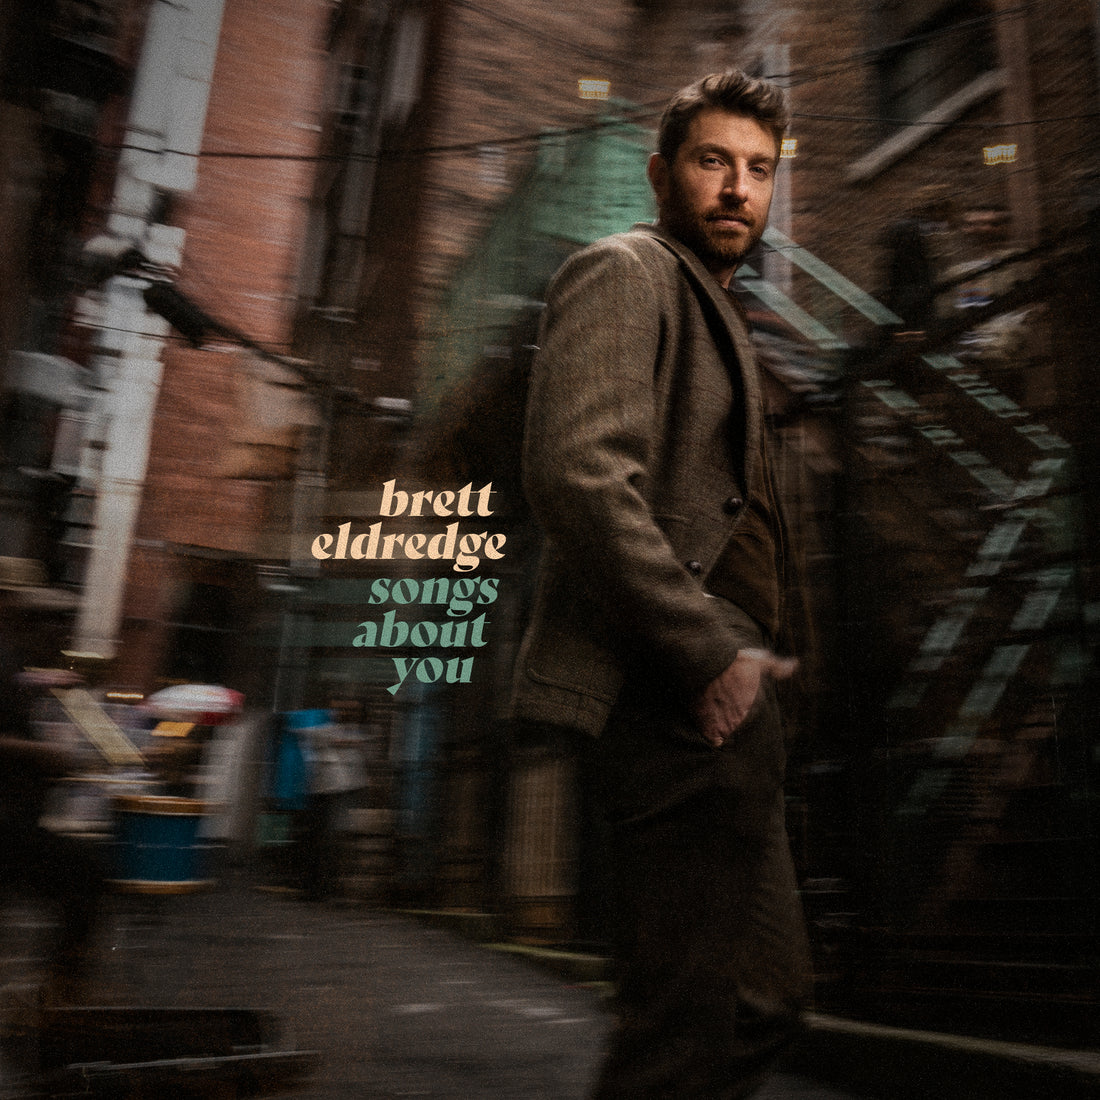 Brett Eldredge’s New Album Songs About You Debuts Tomorrow With Rave Reviews